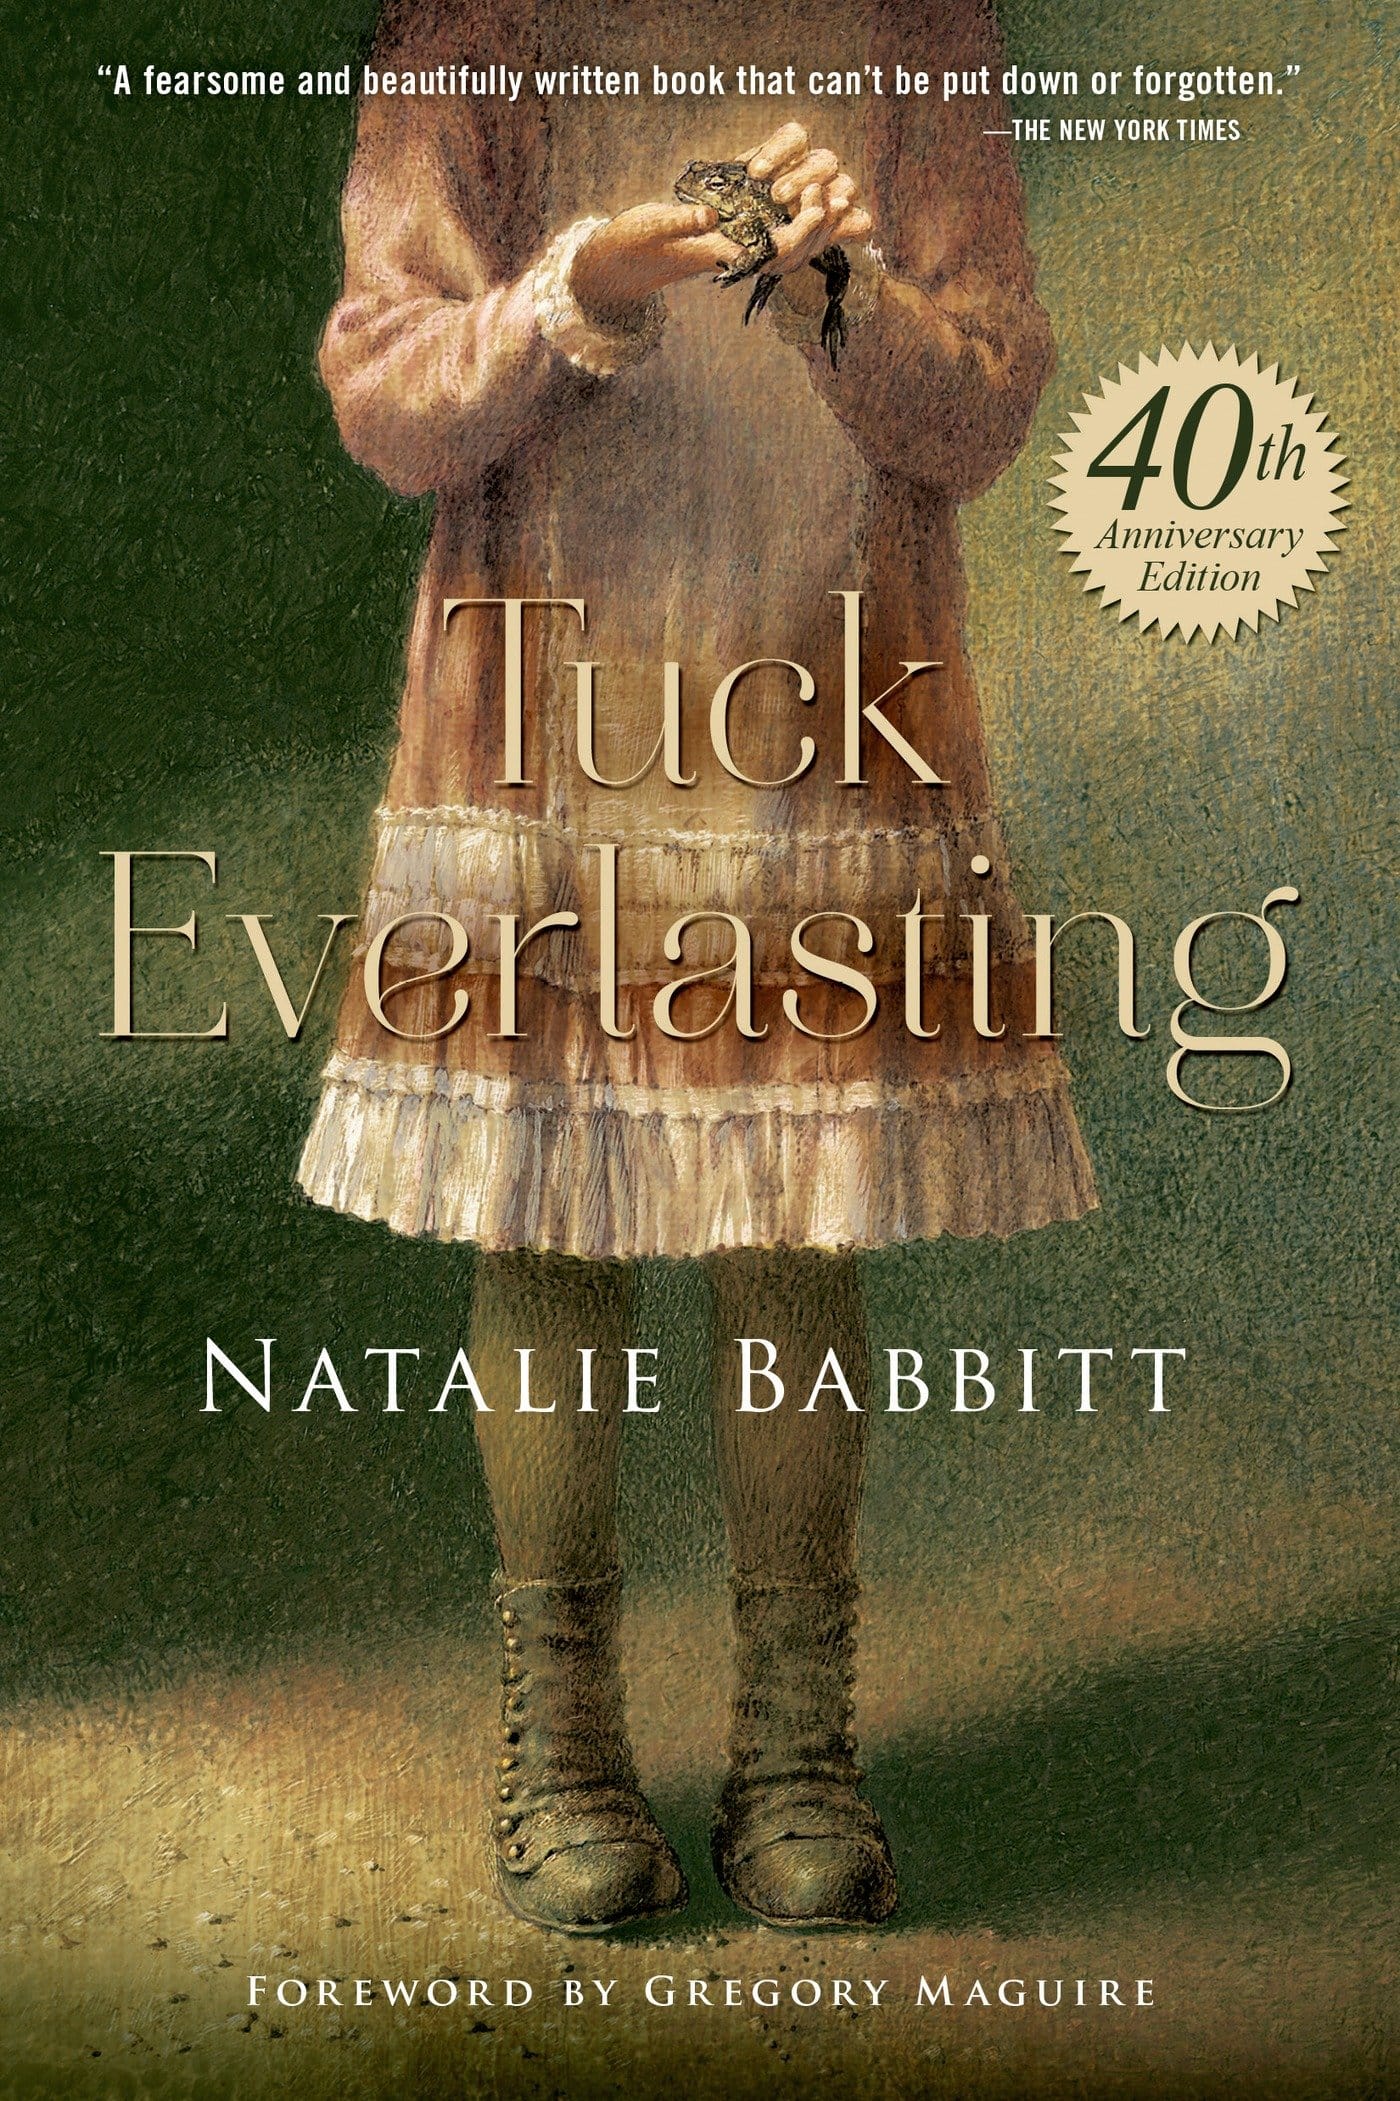 The cover for the book Tuck Everlasting